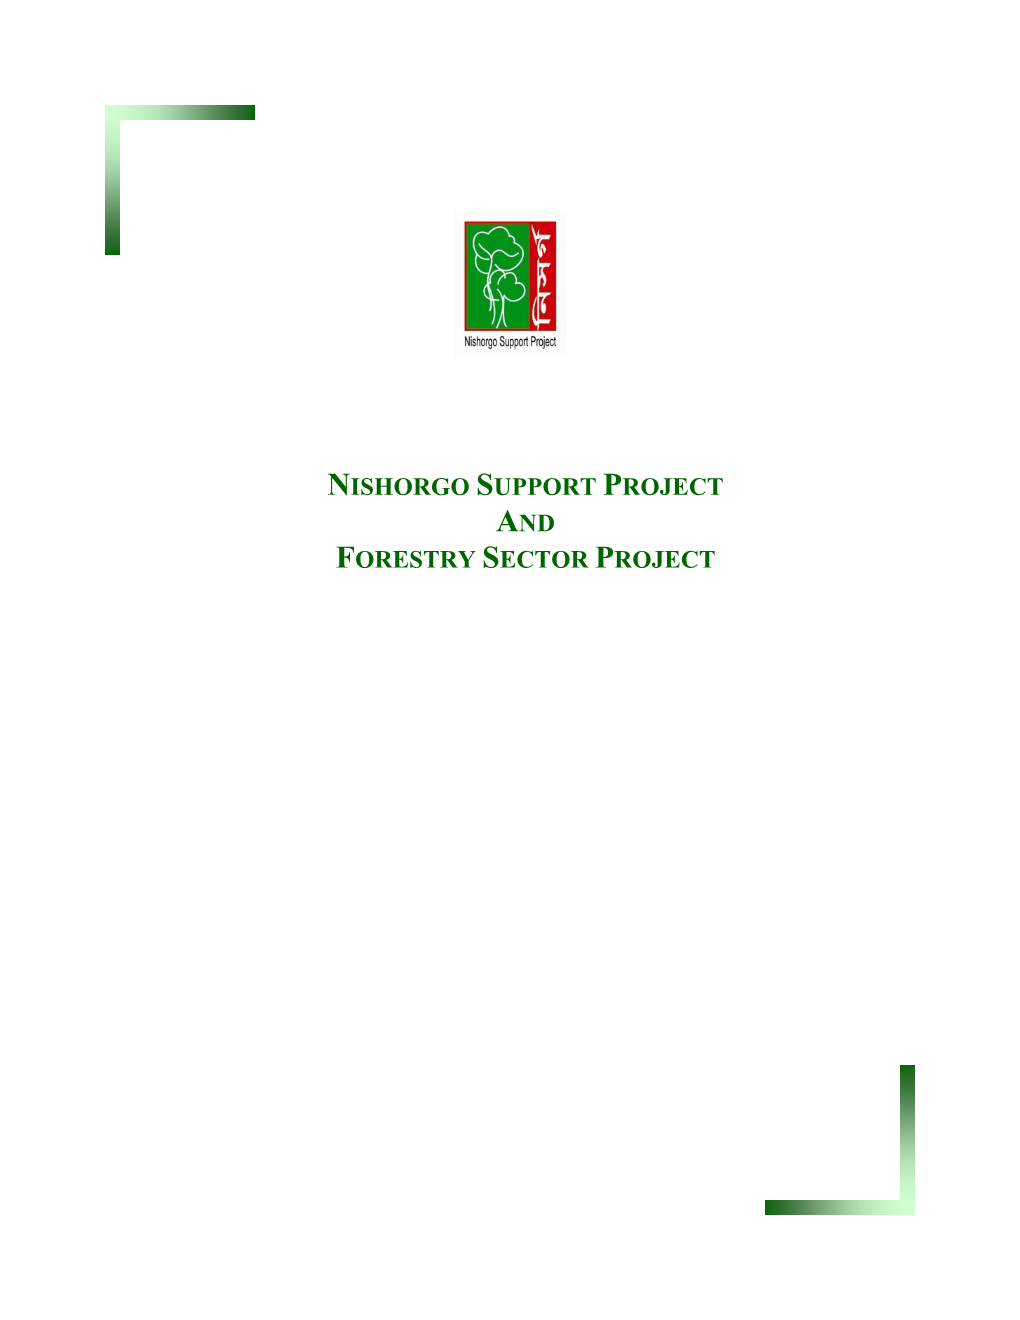 Nishorgo Support Project and Forestry Sector Project